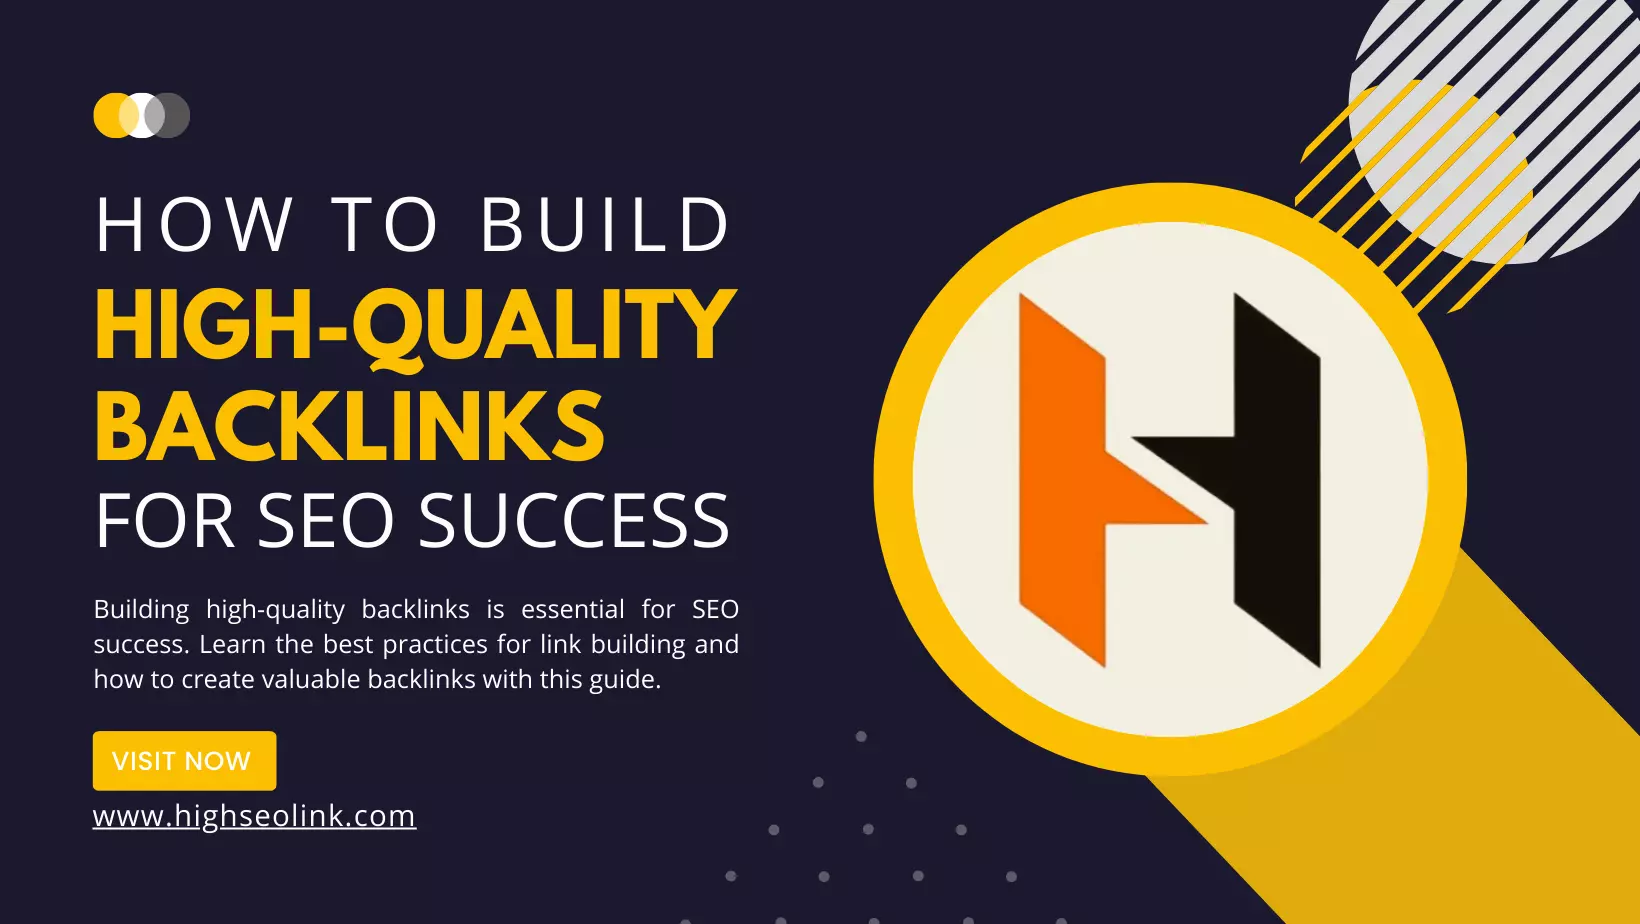 How to Build High-Quality Backlinks for SEO Success